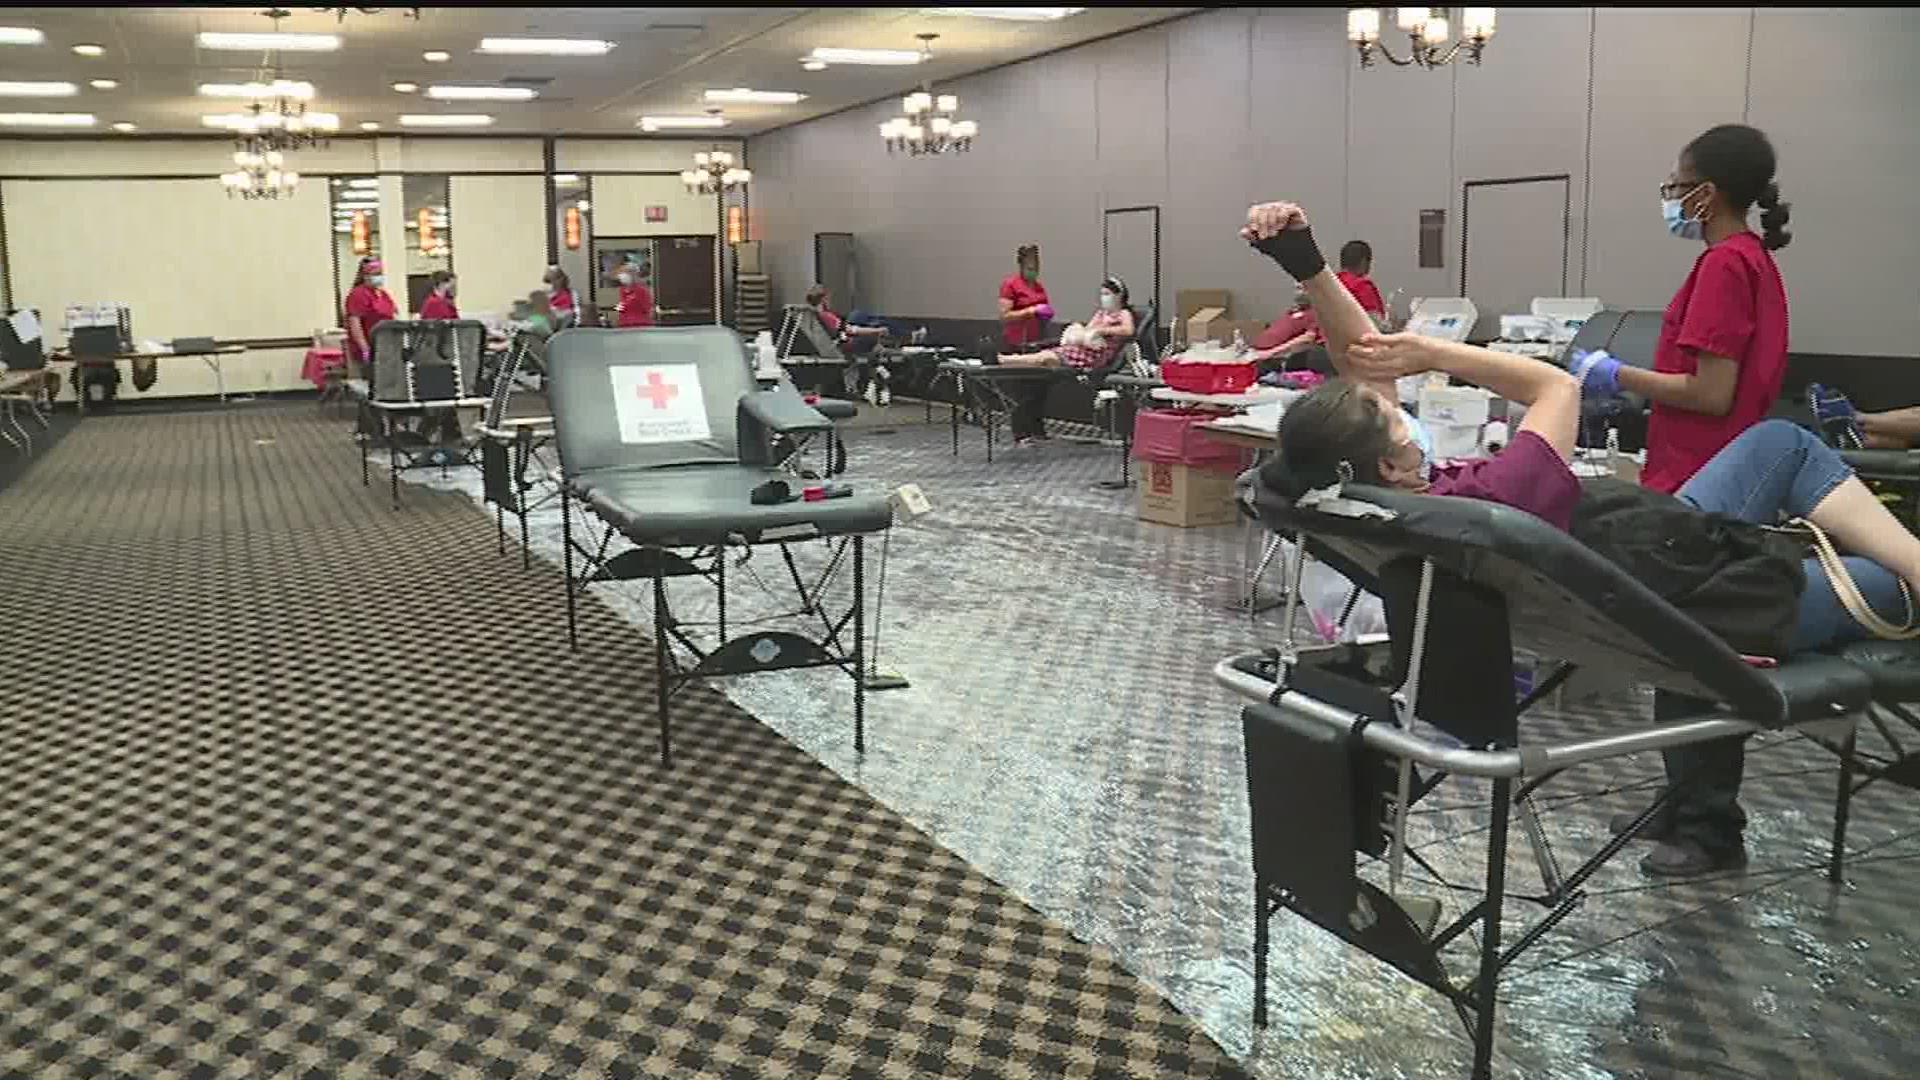 112 people signed up to give the gift of life at the Wyndham Garden York for the first 'Battle of the Badges' blood drive.